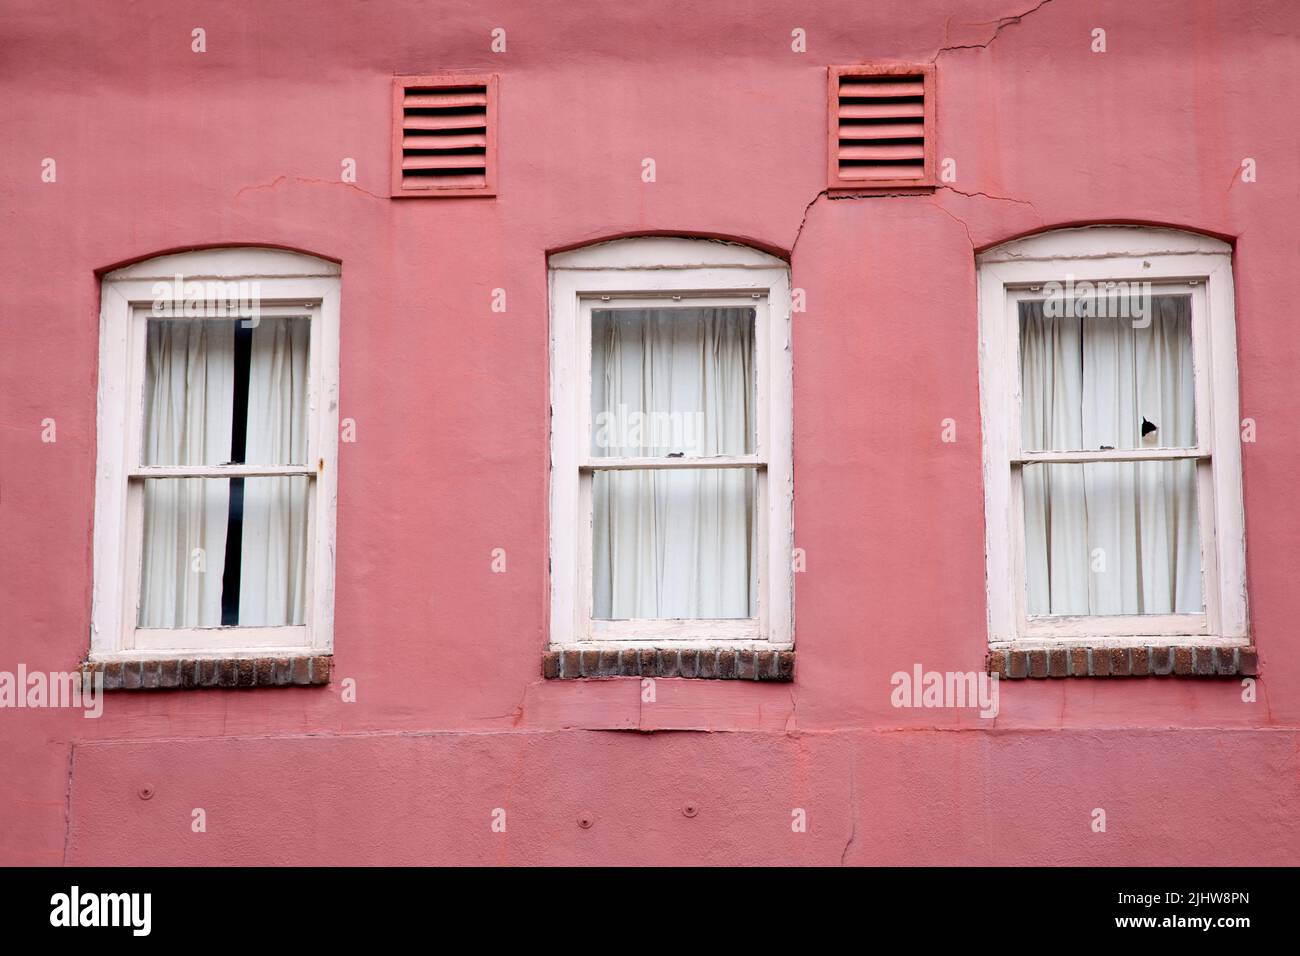 Pink building facade with white framed windows, background. Stock Photo